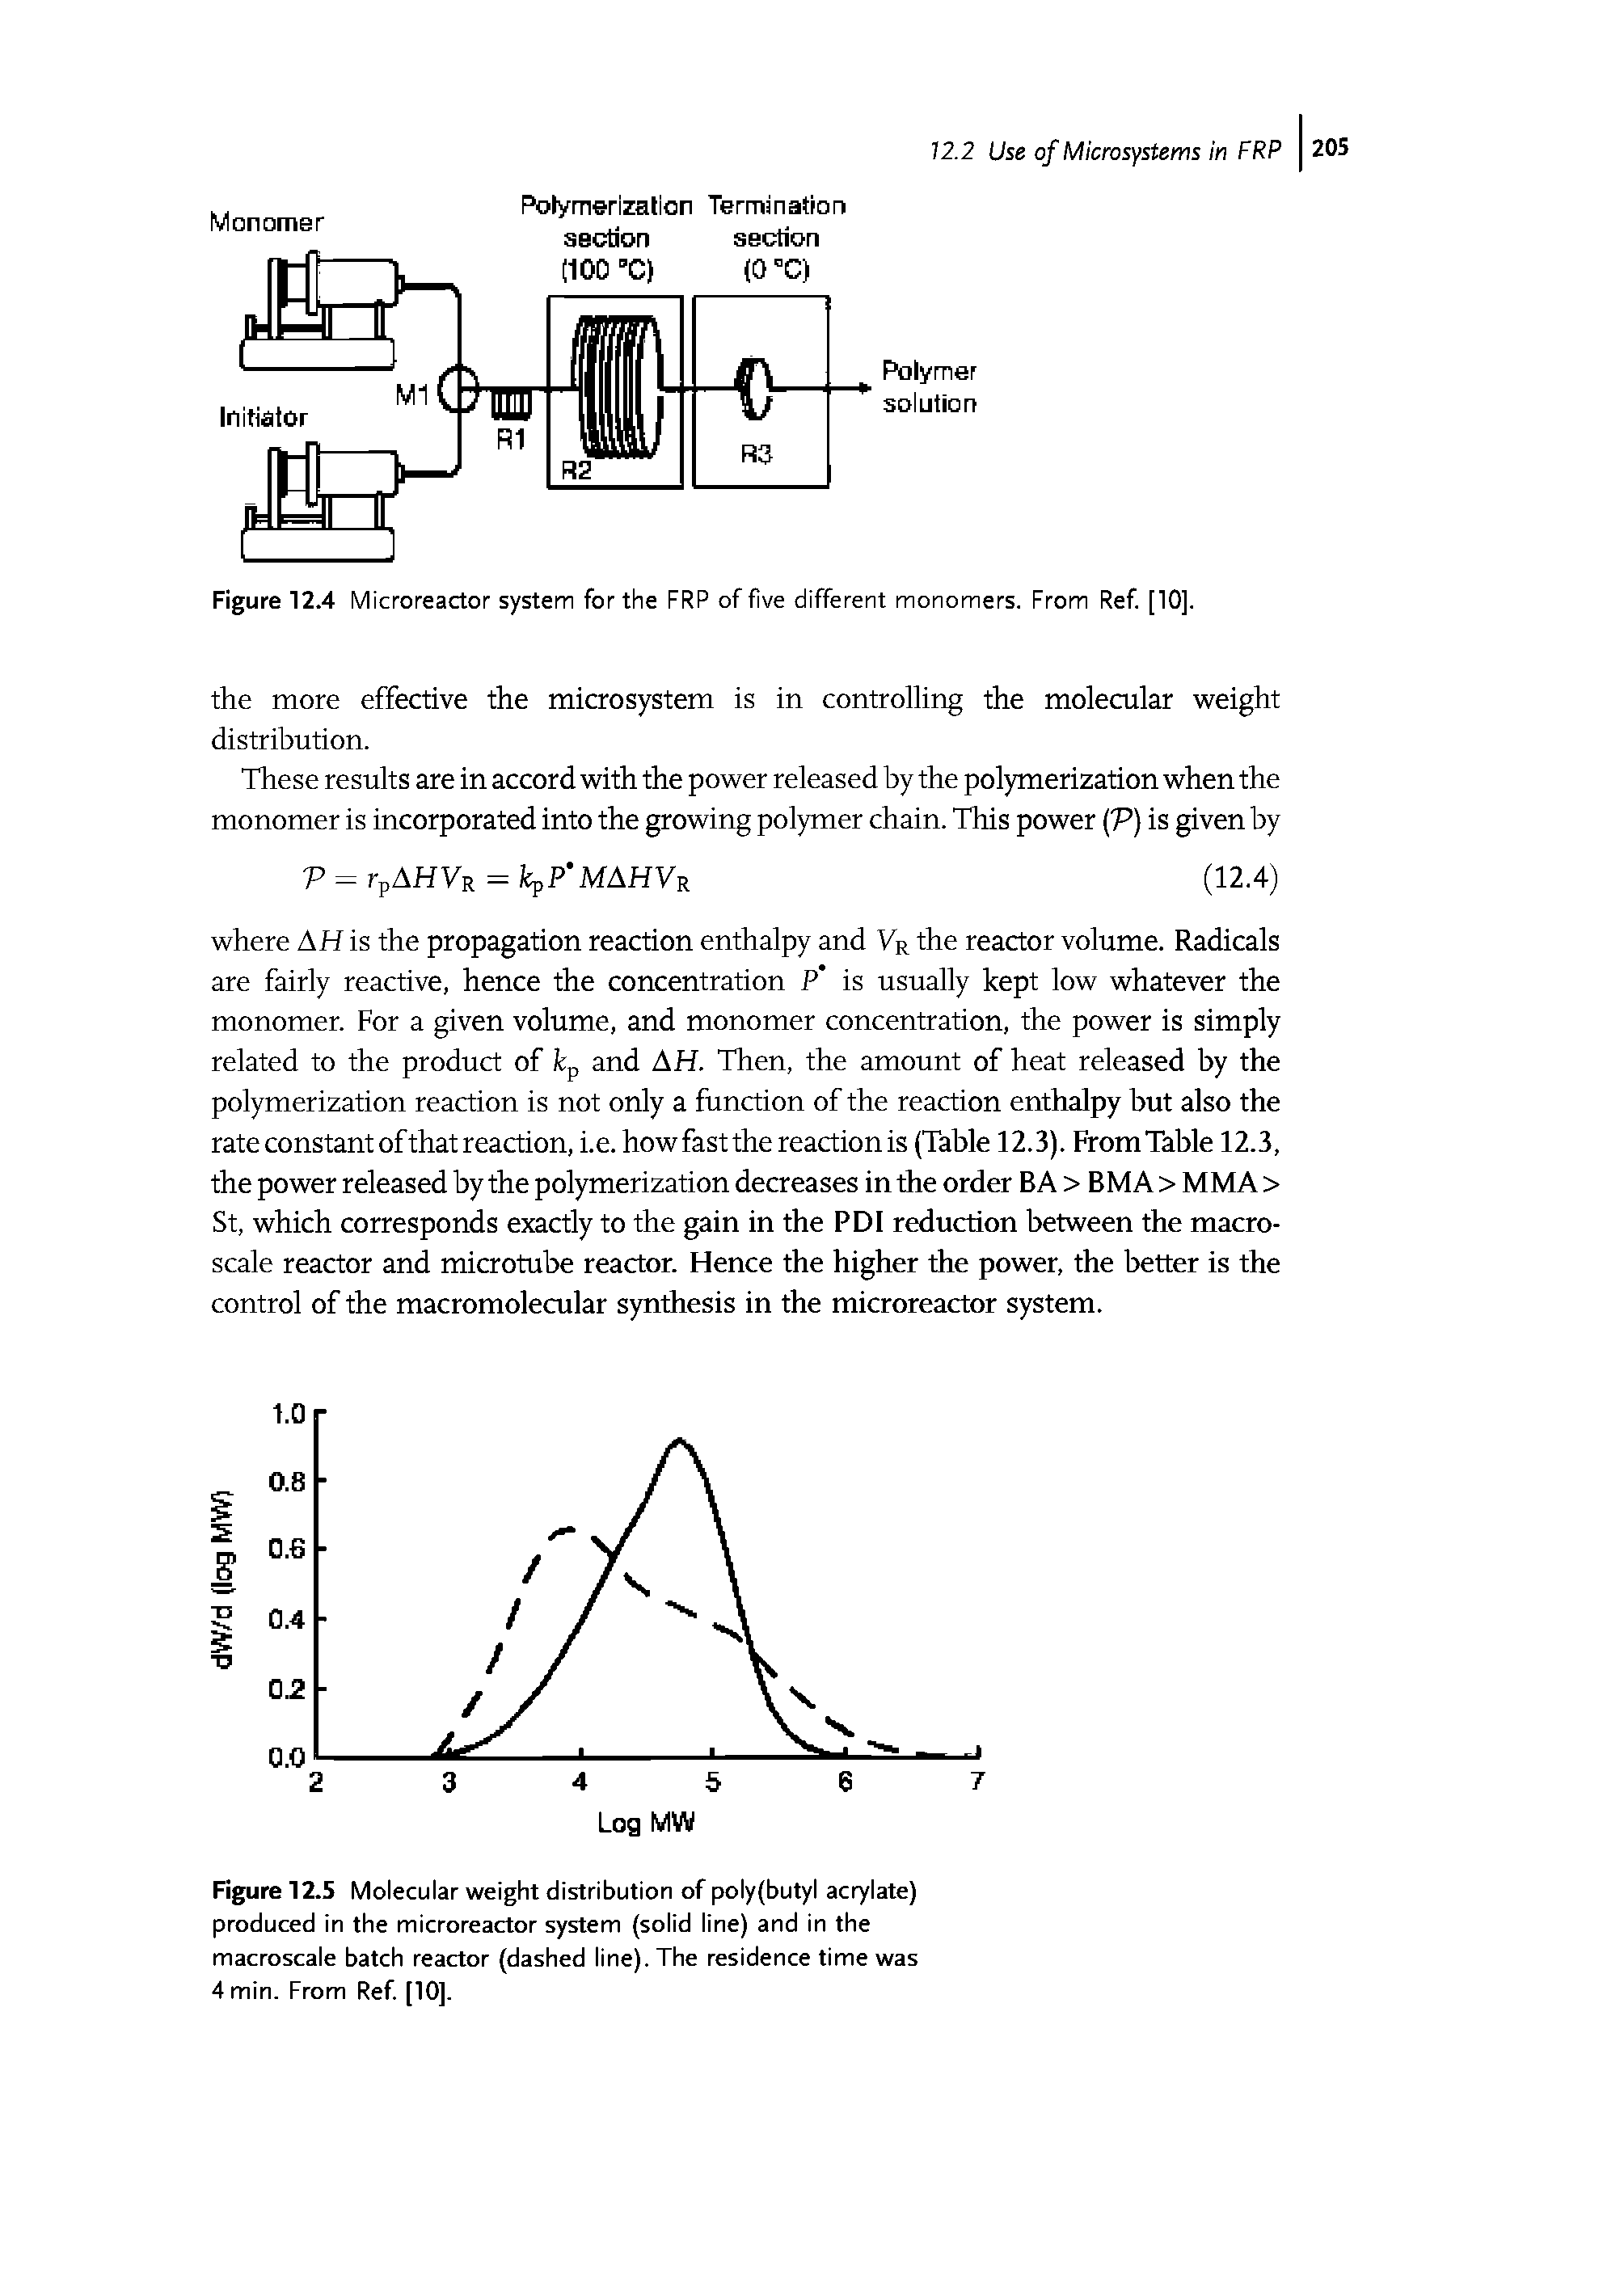 Figure 12.5 Molecular weight distribution of poly(butyl acrylate) produced in the microreactor system (solid line) and in the macroscale batch reactor (dashed line). The residence time was 4 min. From Ref [10].